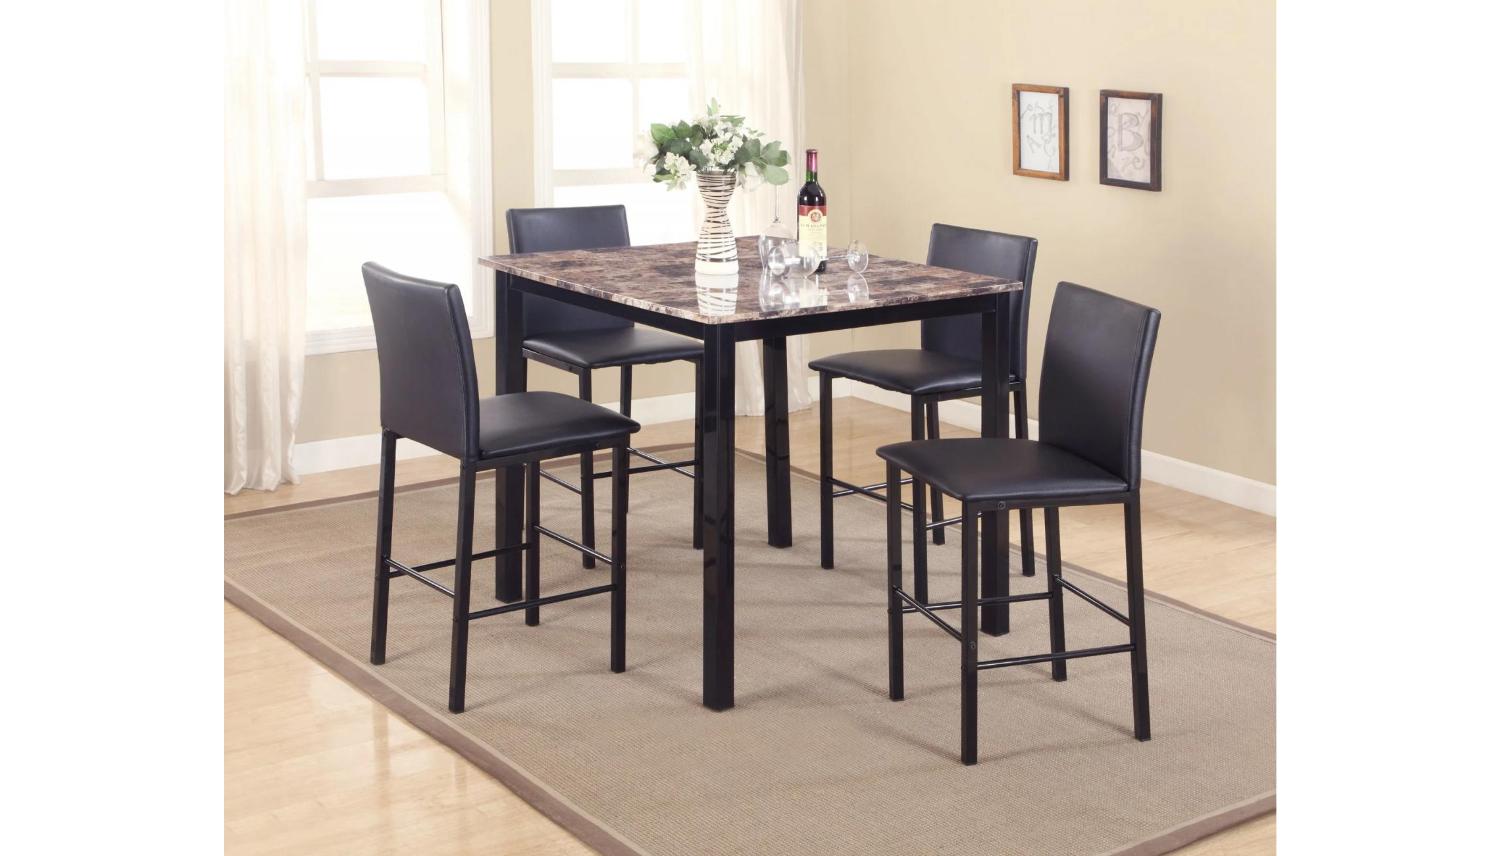 Transitional, Simple Counter Dining Set Aiden 1817SET-5pcs in Brown PU